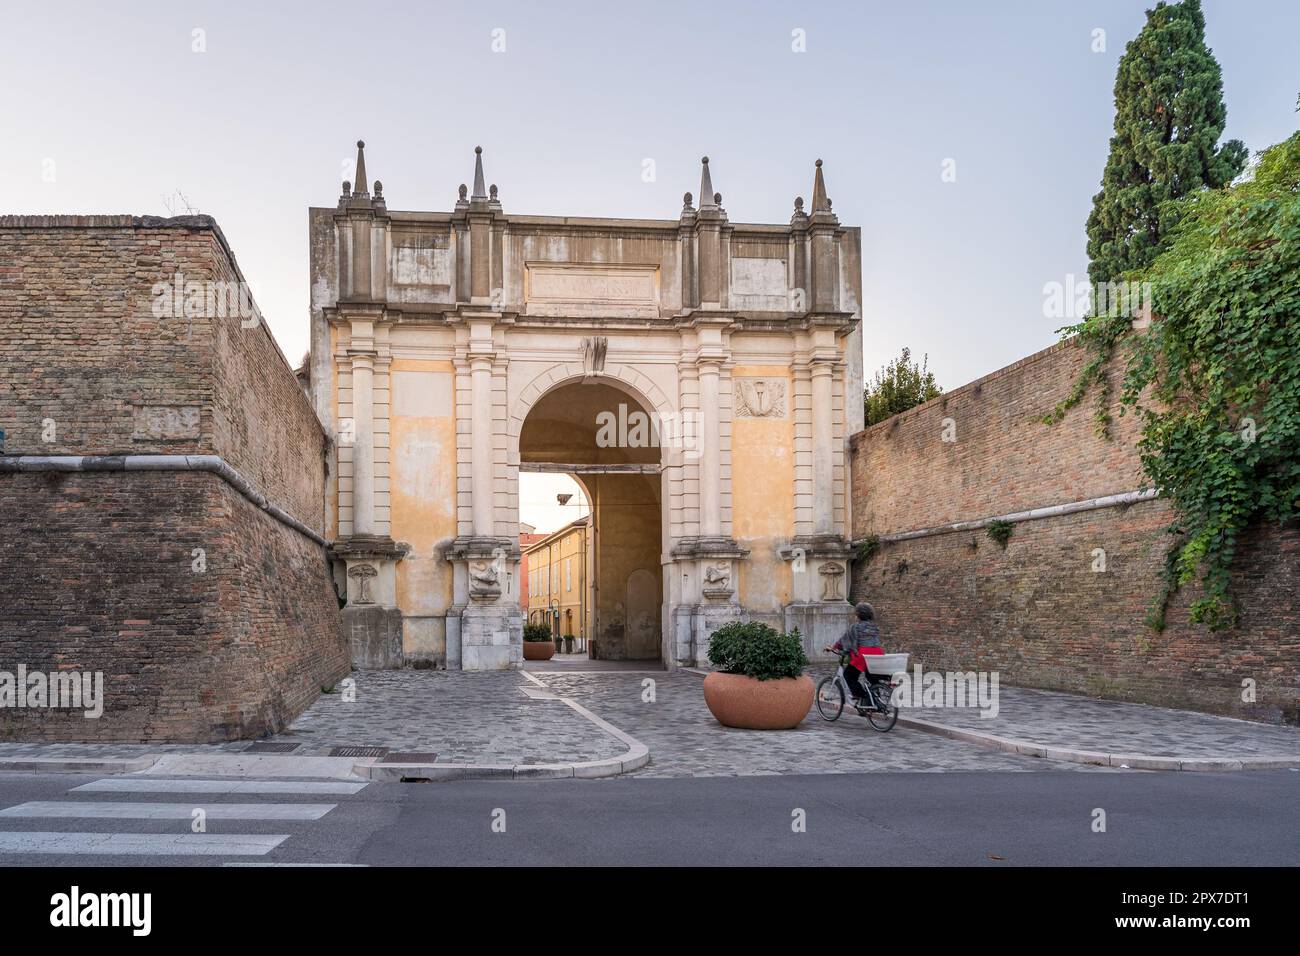 Porta Adriana built in the 11th century, is a city gate of Ravenna, on the edge of the historic center of the city.Italy. Stock Photo